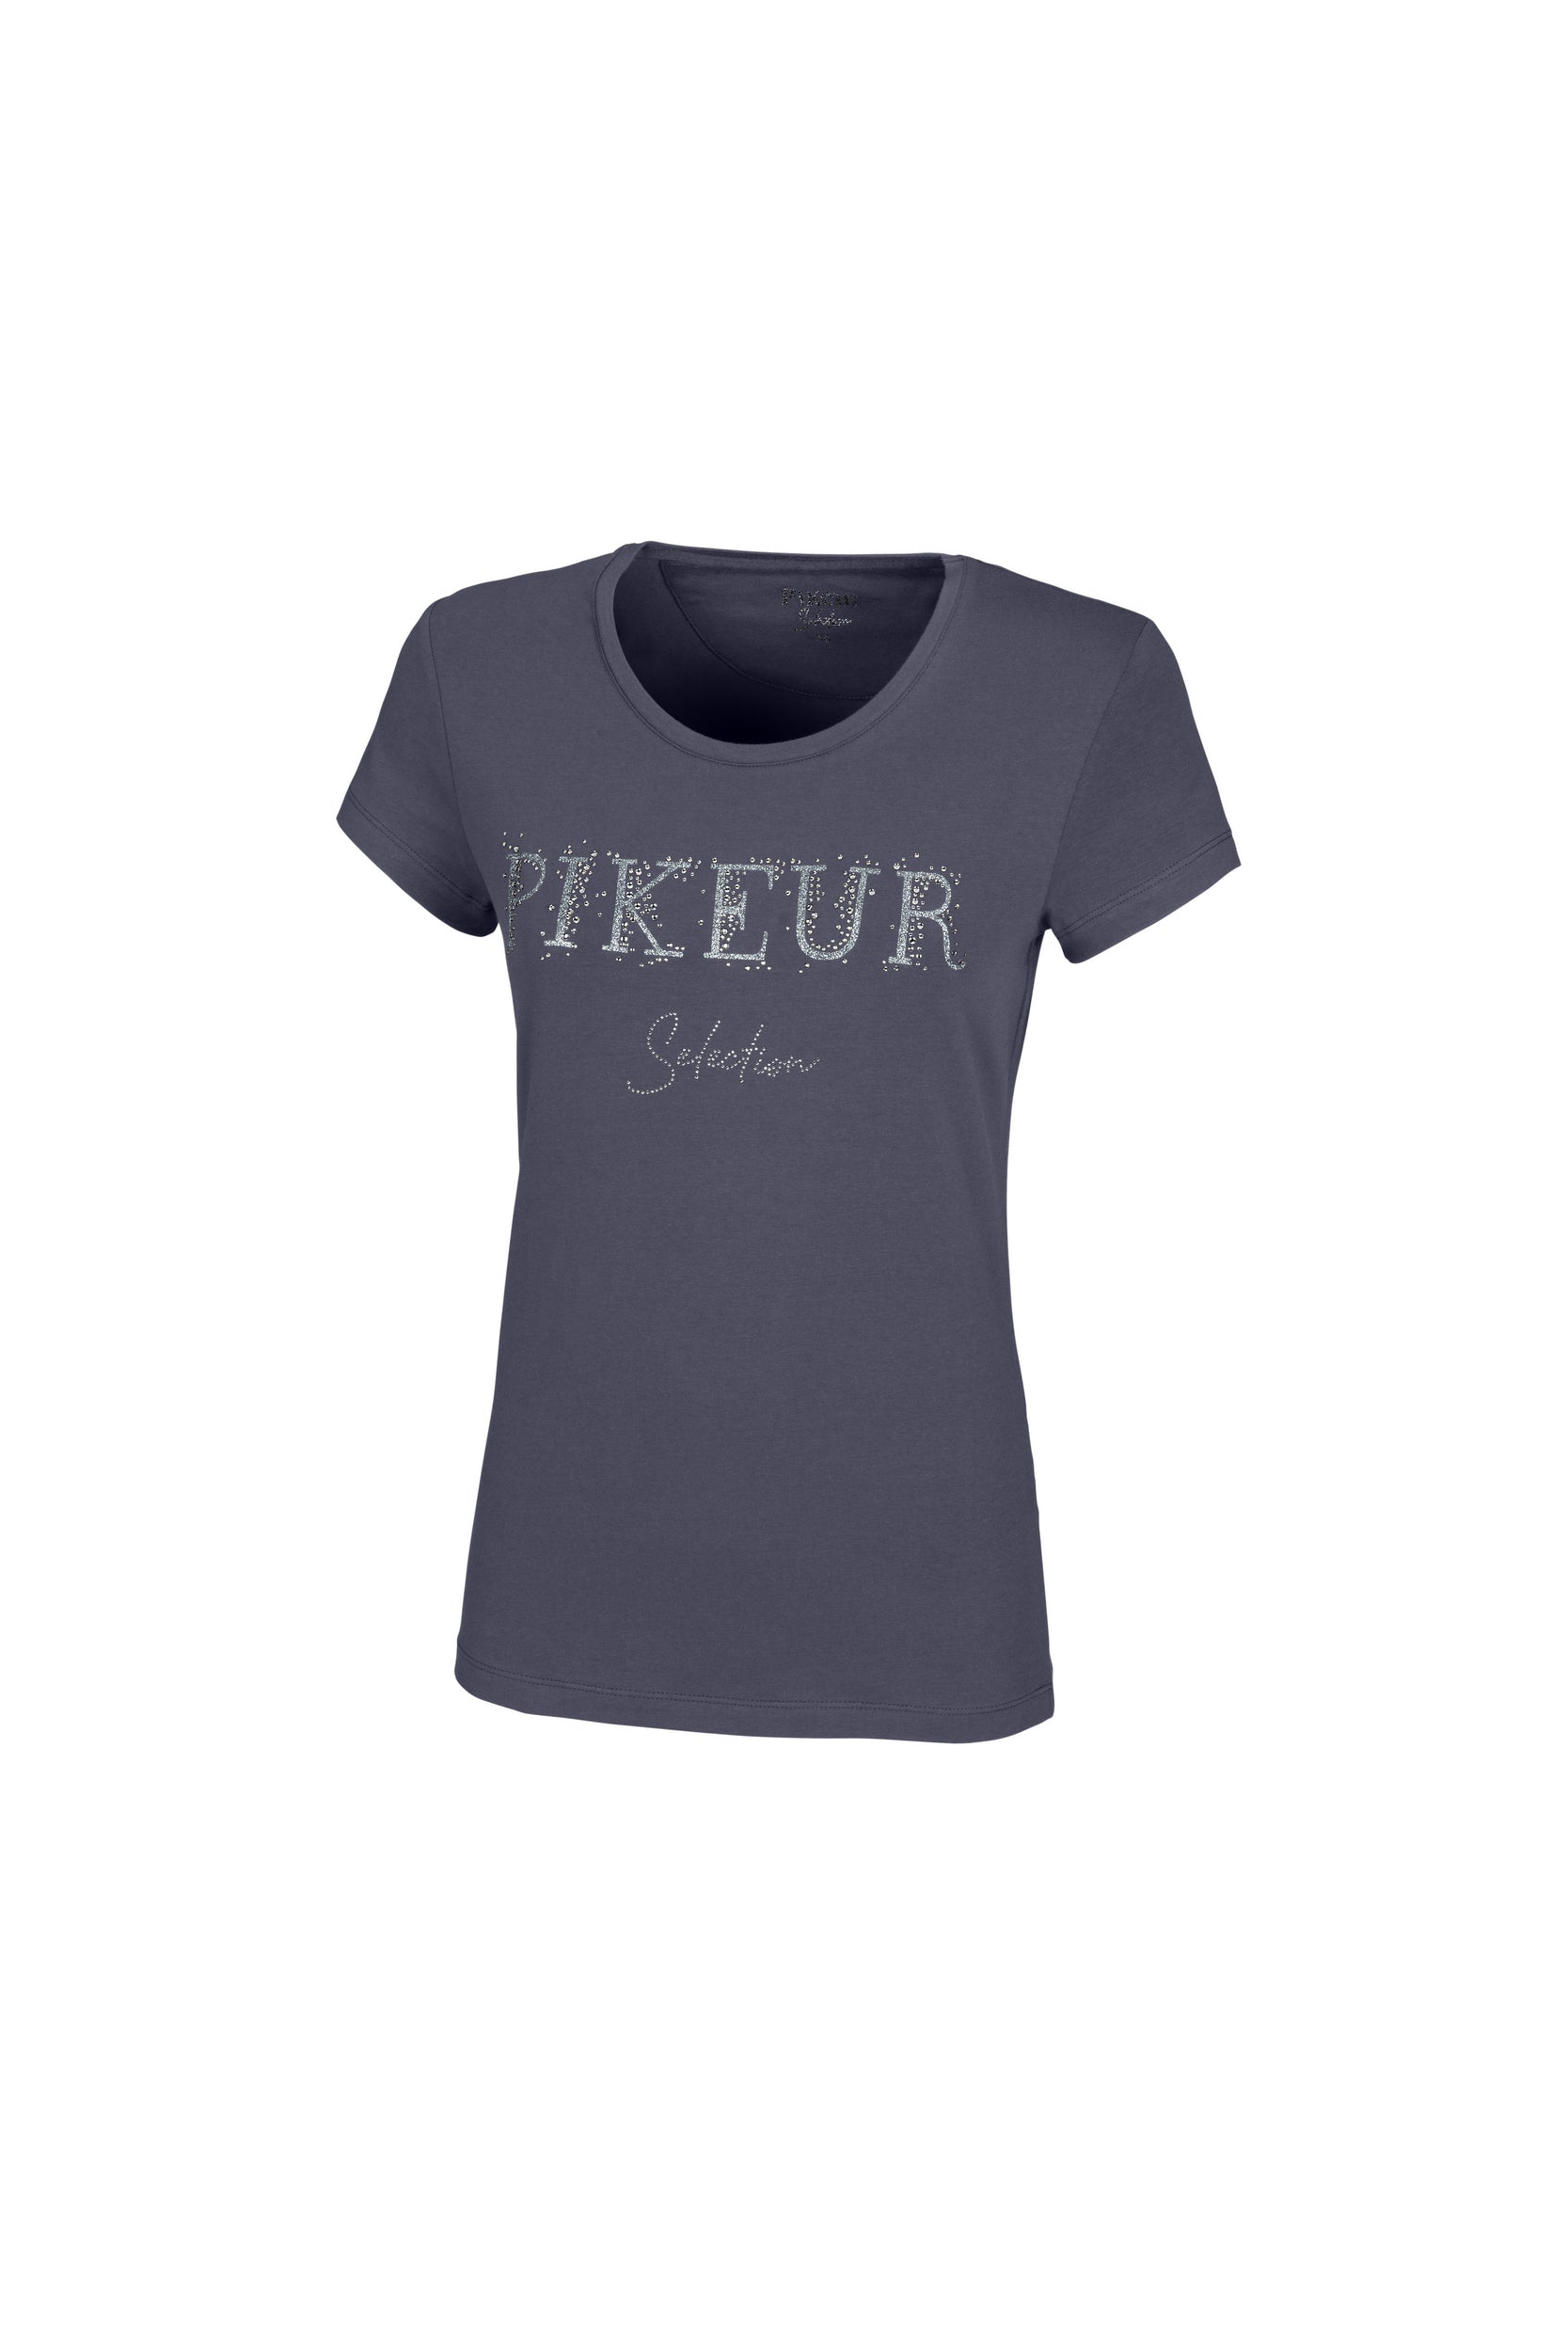 Pikeur Phily t-shirt Blueberry- uk 10 left